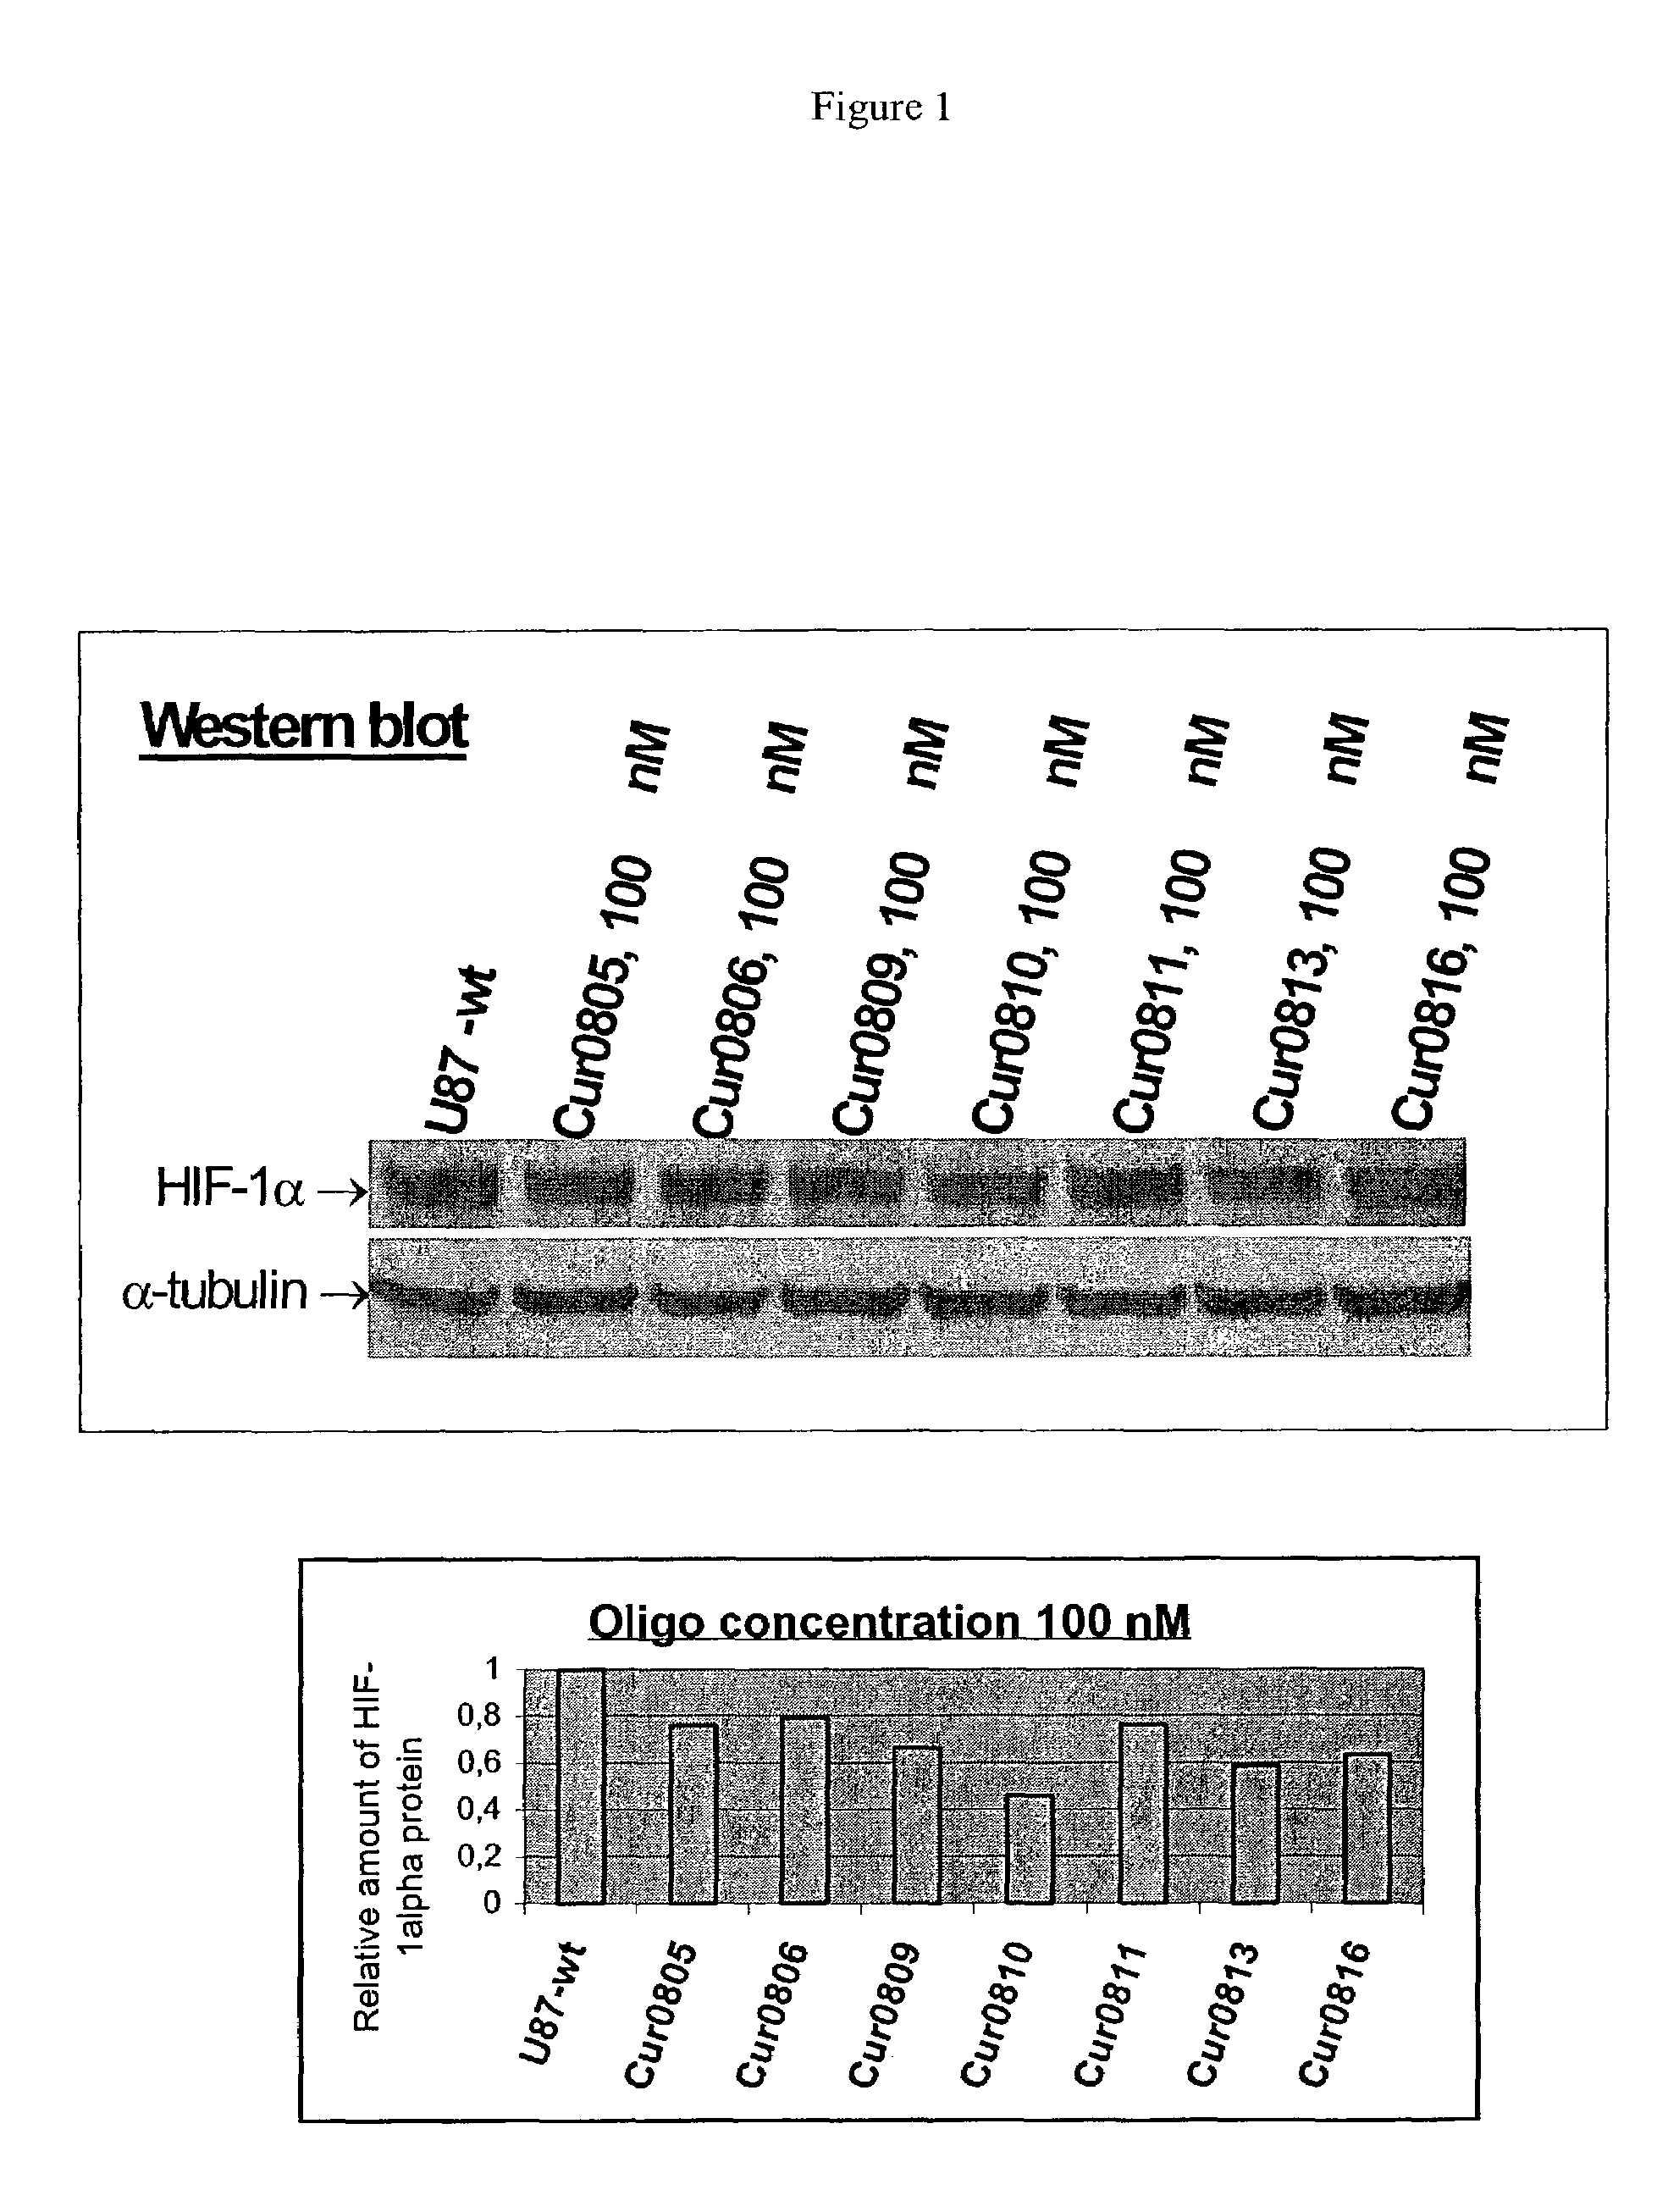 Oligomeric compounds for the modulation HIF-1α expression